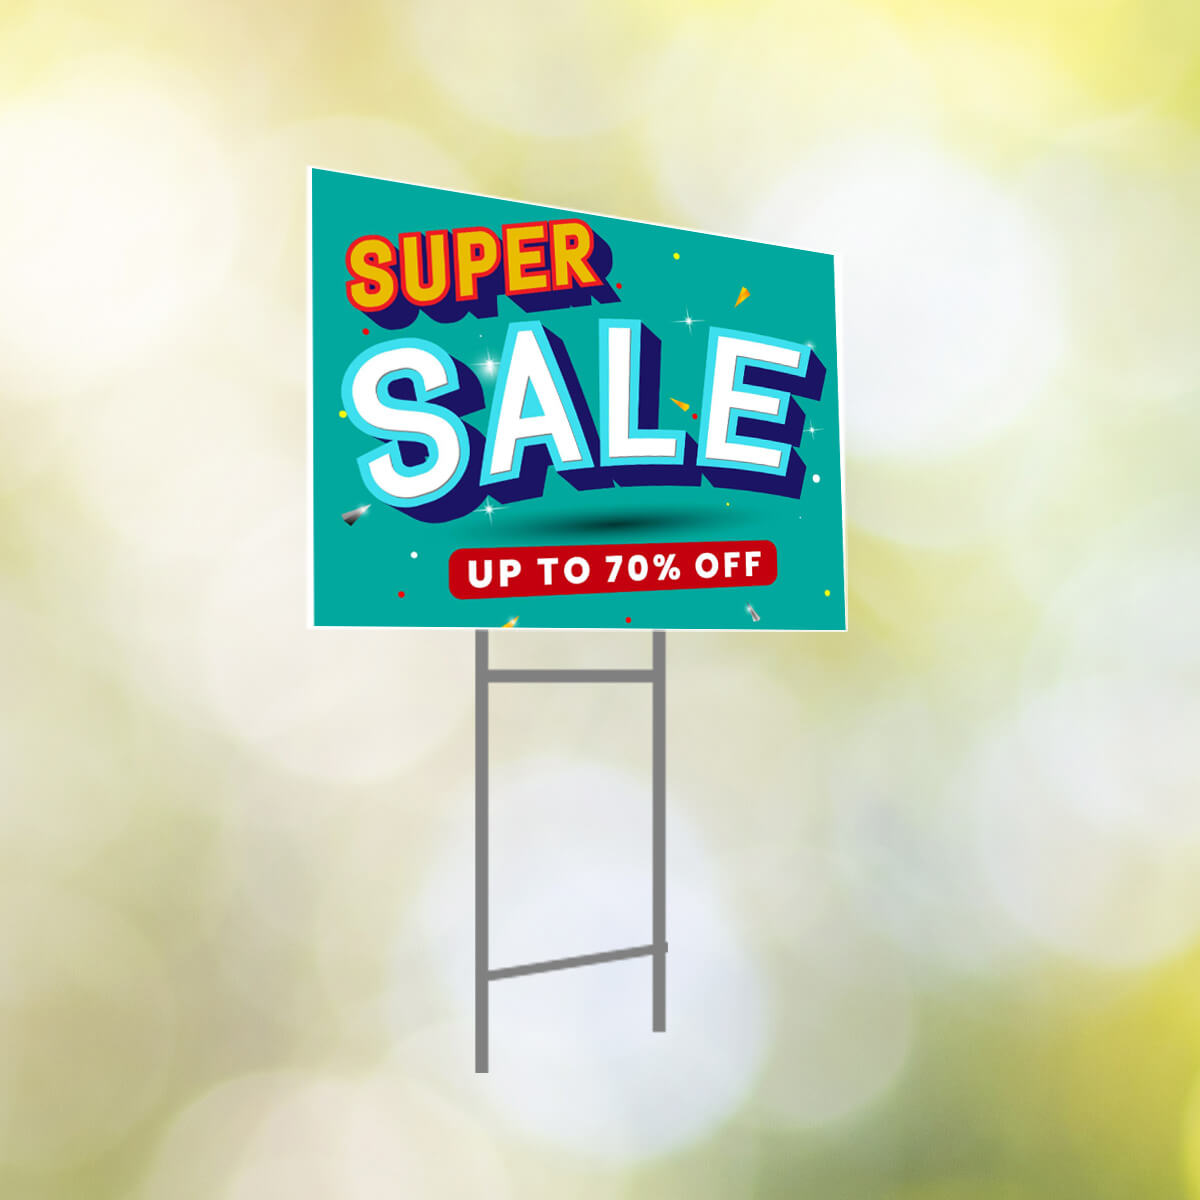 Sale sample sign on fence coroplast signs and banners Curative Printing